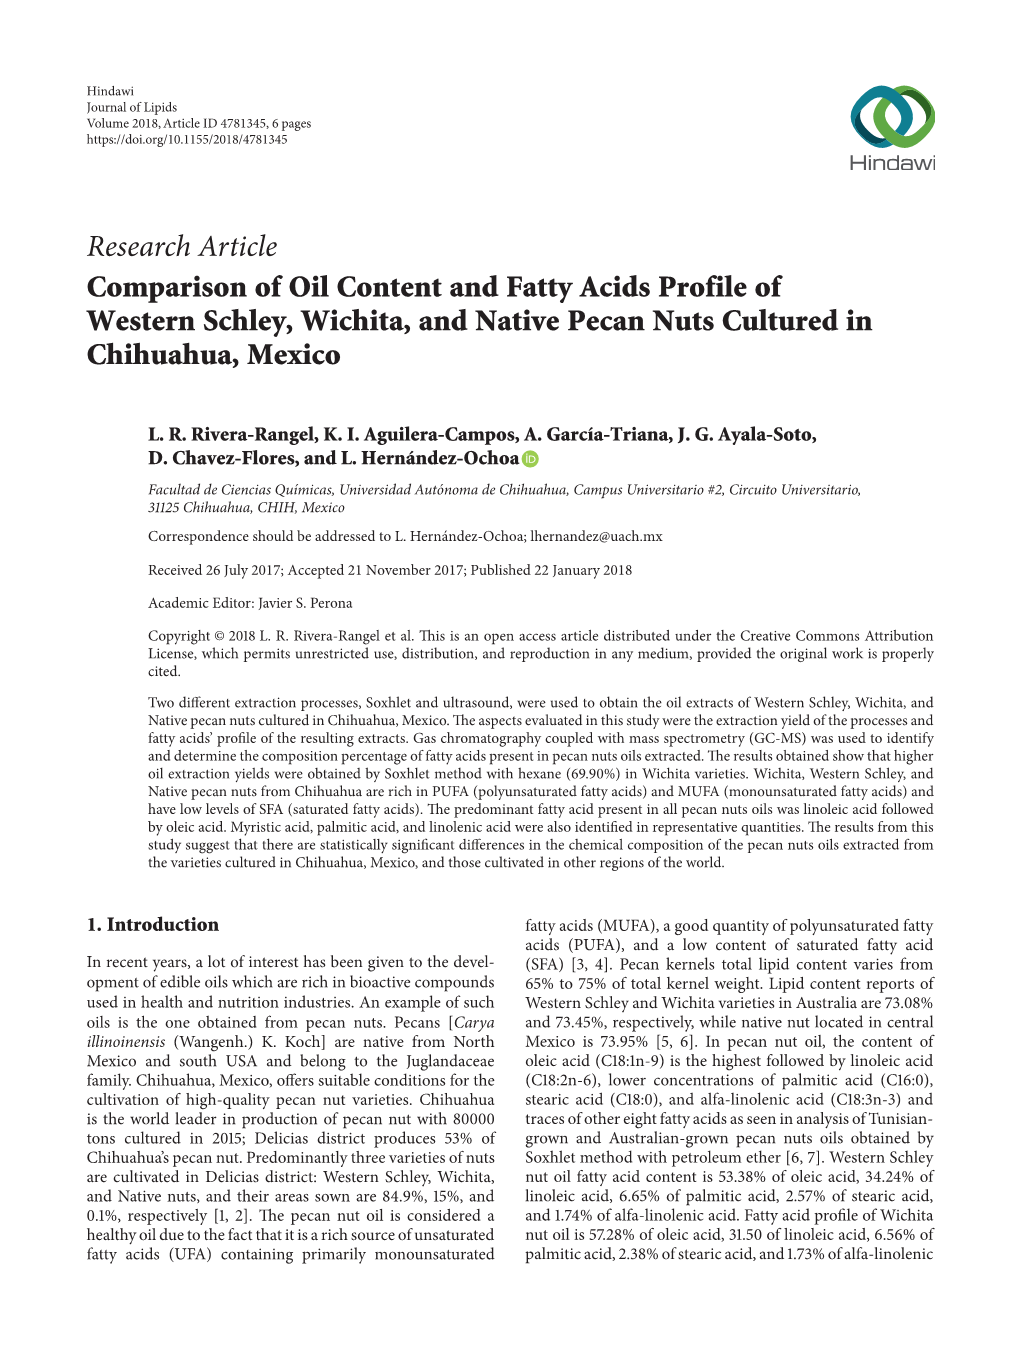 Comparison of Oil Content and Fatty Acids Profile of Western Schley, Wichita, and Native Pecan Nuts Cultured in Chihuahua, Mexico